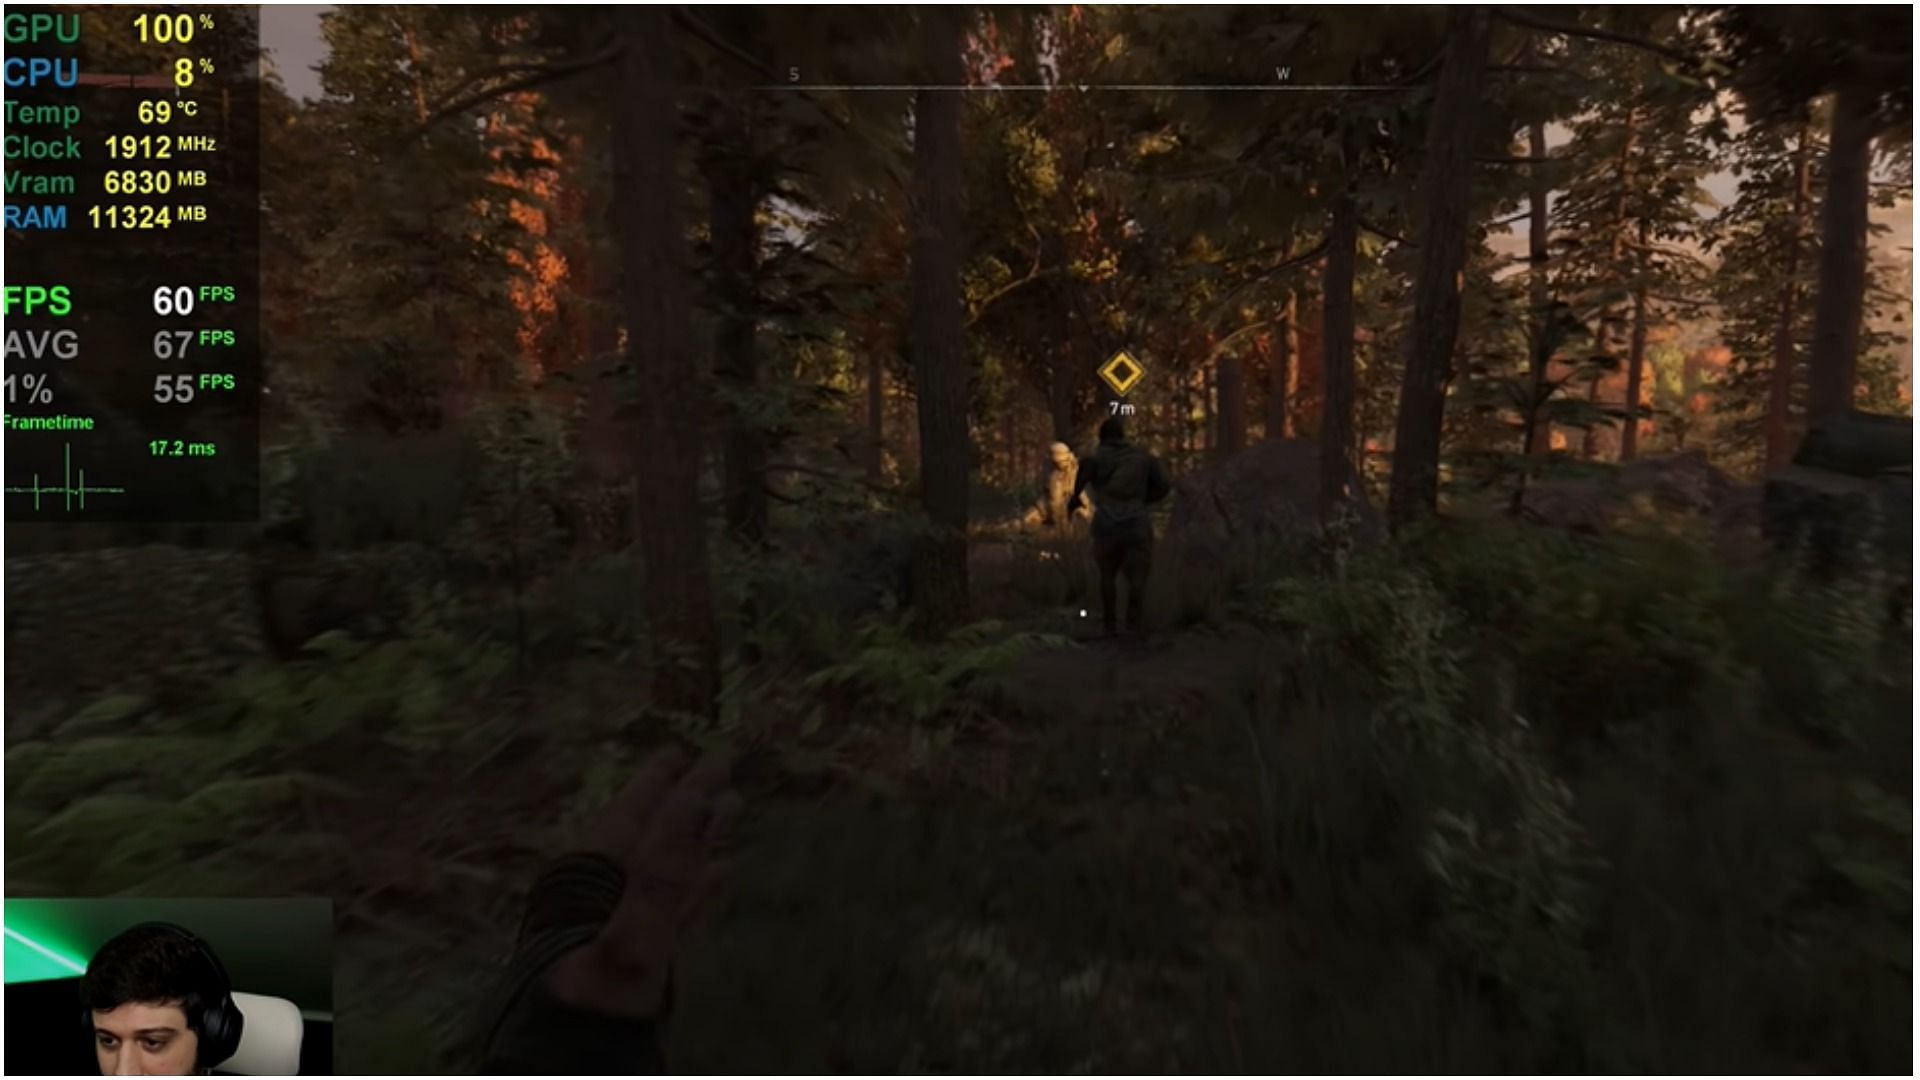 The game runs well at 60 fps (Image via YouTube - zWORMz Gaming)